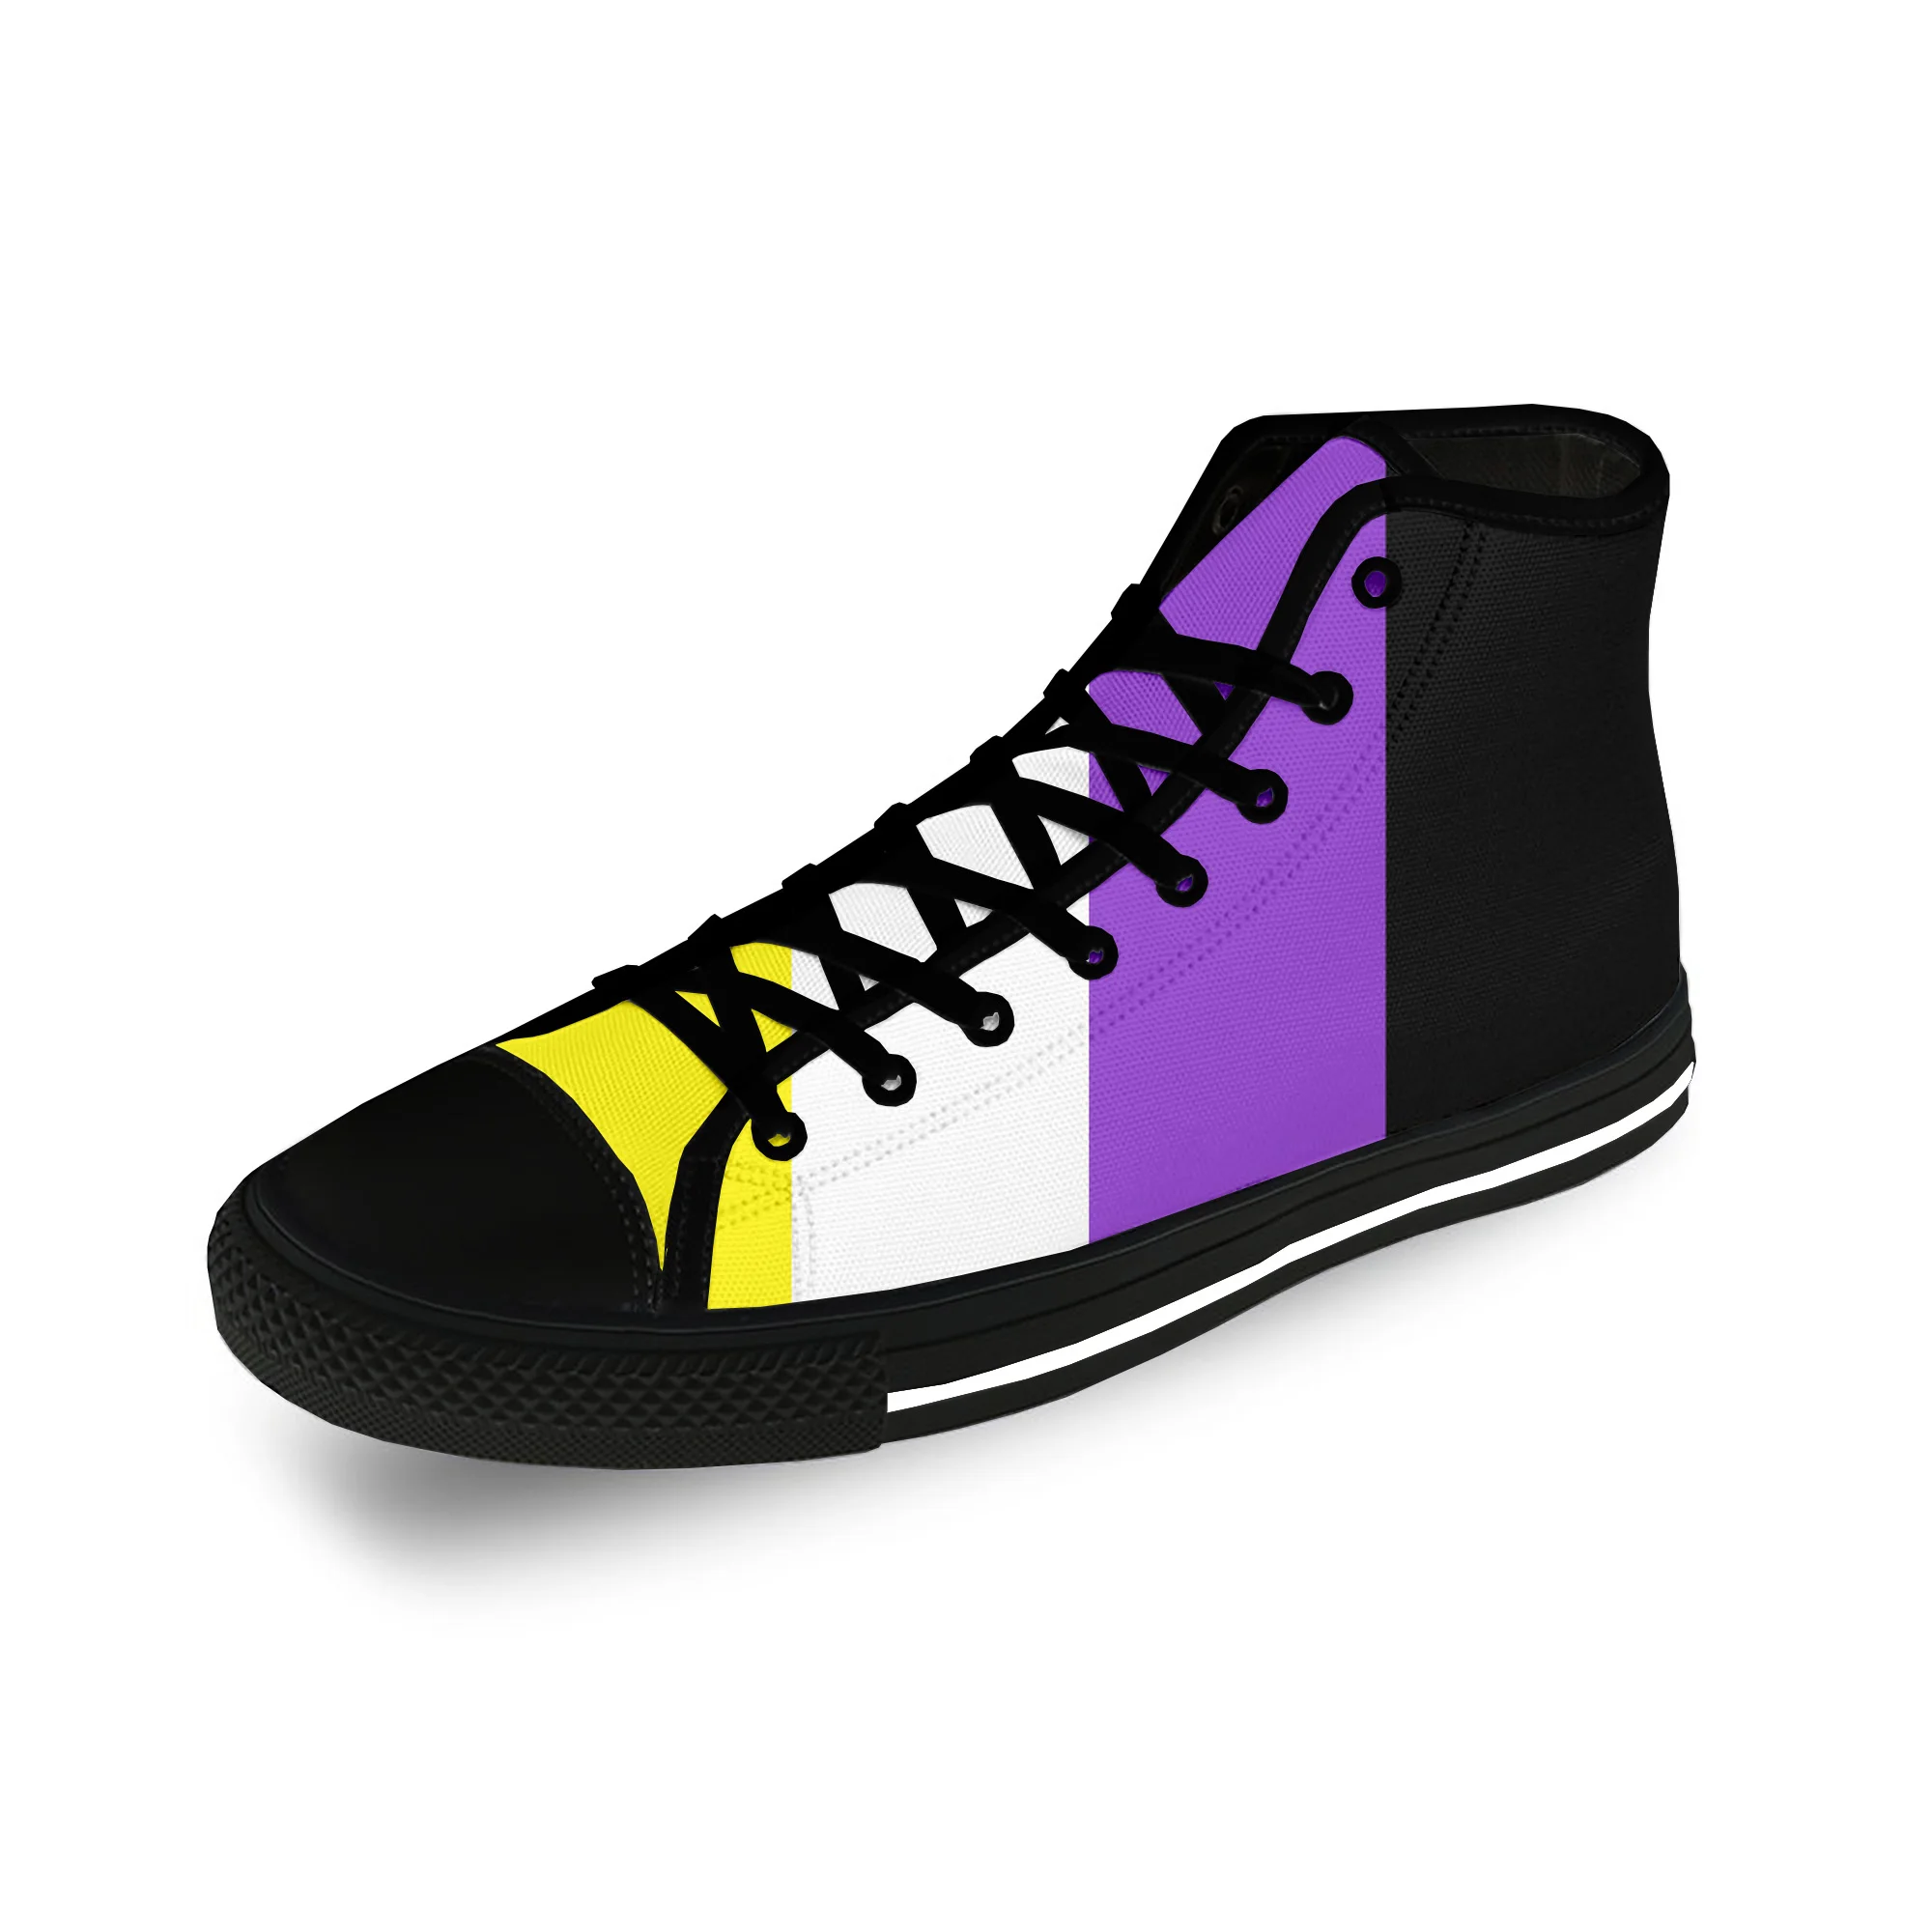 Non binary Flag Enby Pride Funny Casual Cloth Fashion 3D Print High Top Canvas Shoes Men Women Lightweight Breathable Sneakers poland polish flag patriotic pride fashion funny casual cloth shoes high top lightweight breathable 3d print men women sneakers